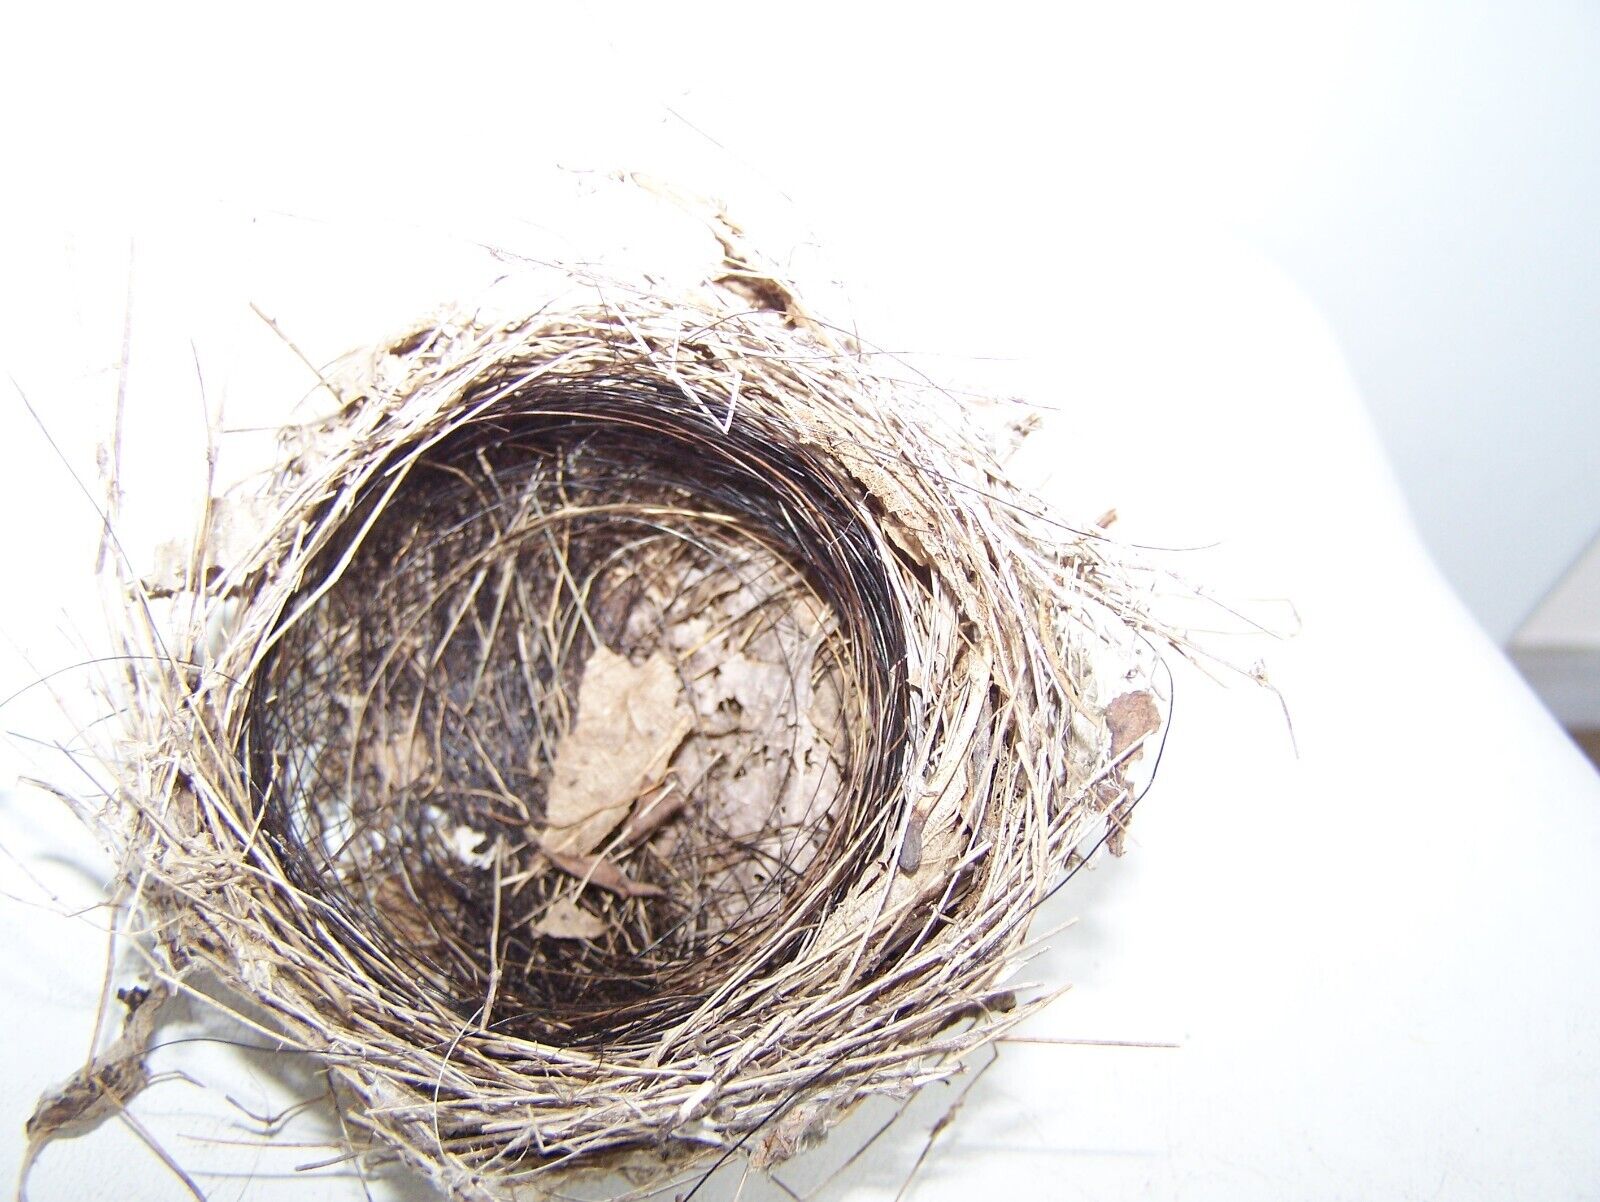 SALE Real Natural Bird Nest made of Horse Tail/Grass/Twigs - Missouri Abandoned